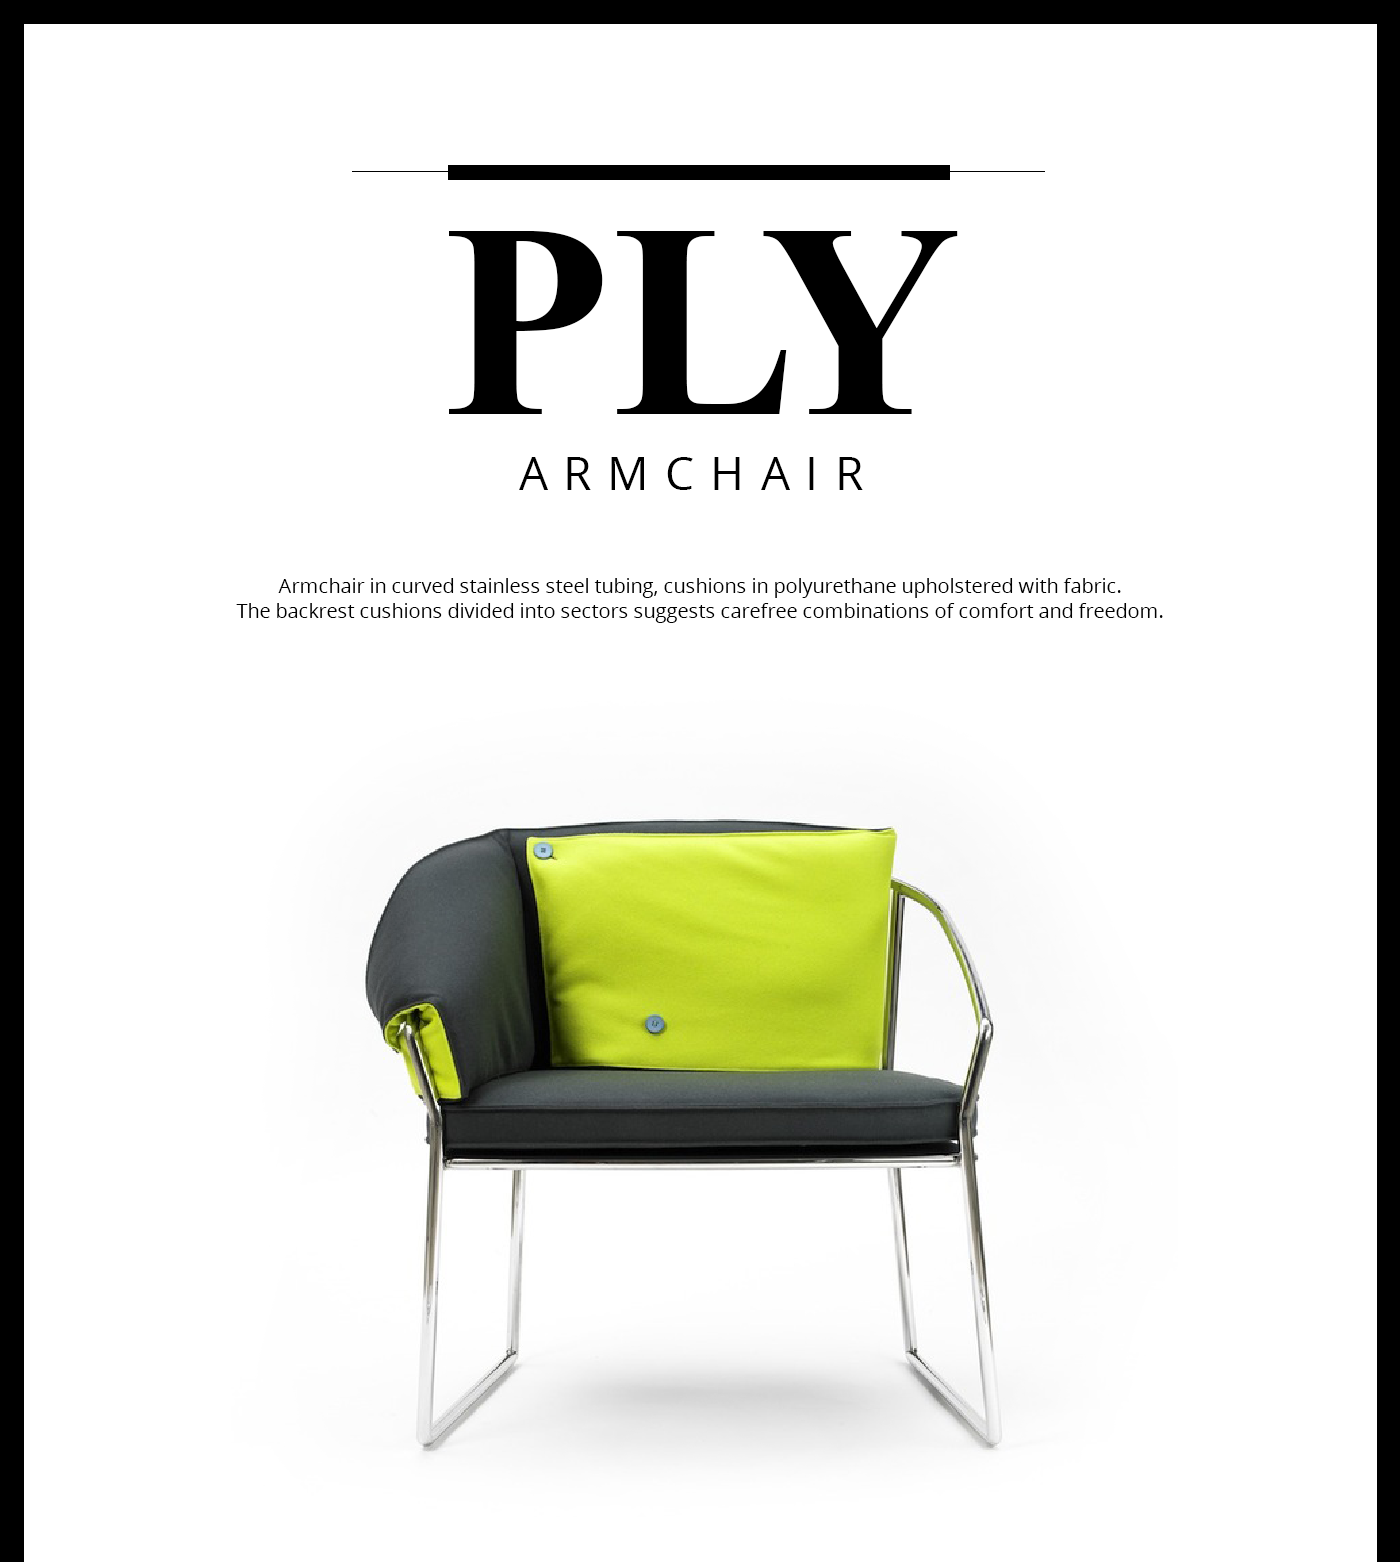 armchair matteomuci chair Ply green product design industrial furniture minimal